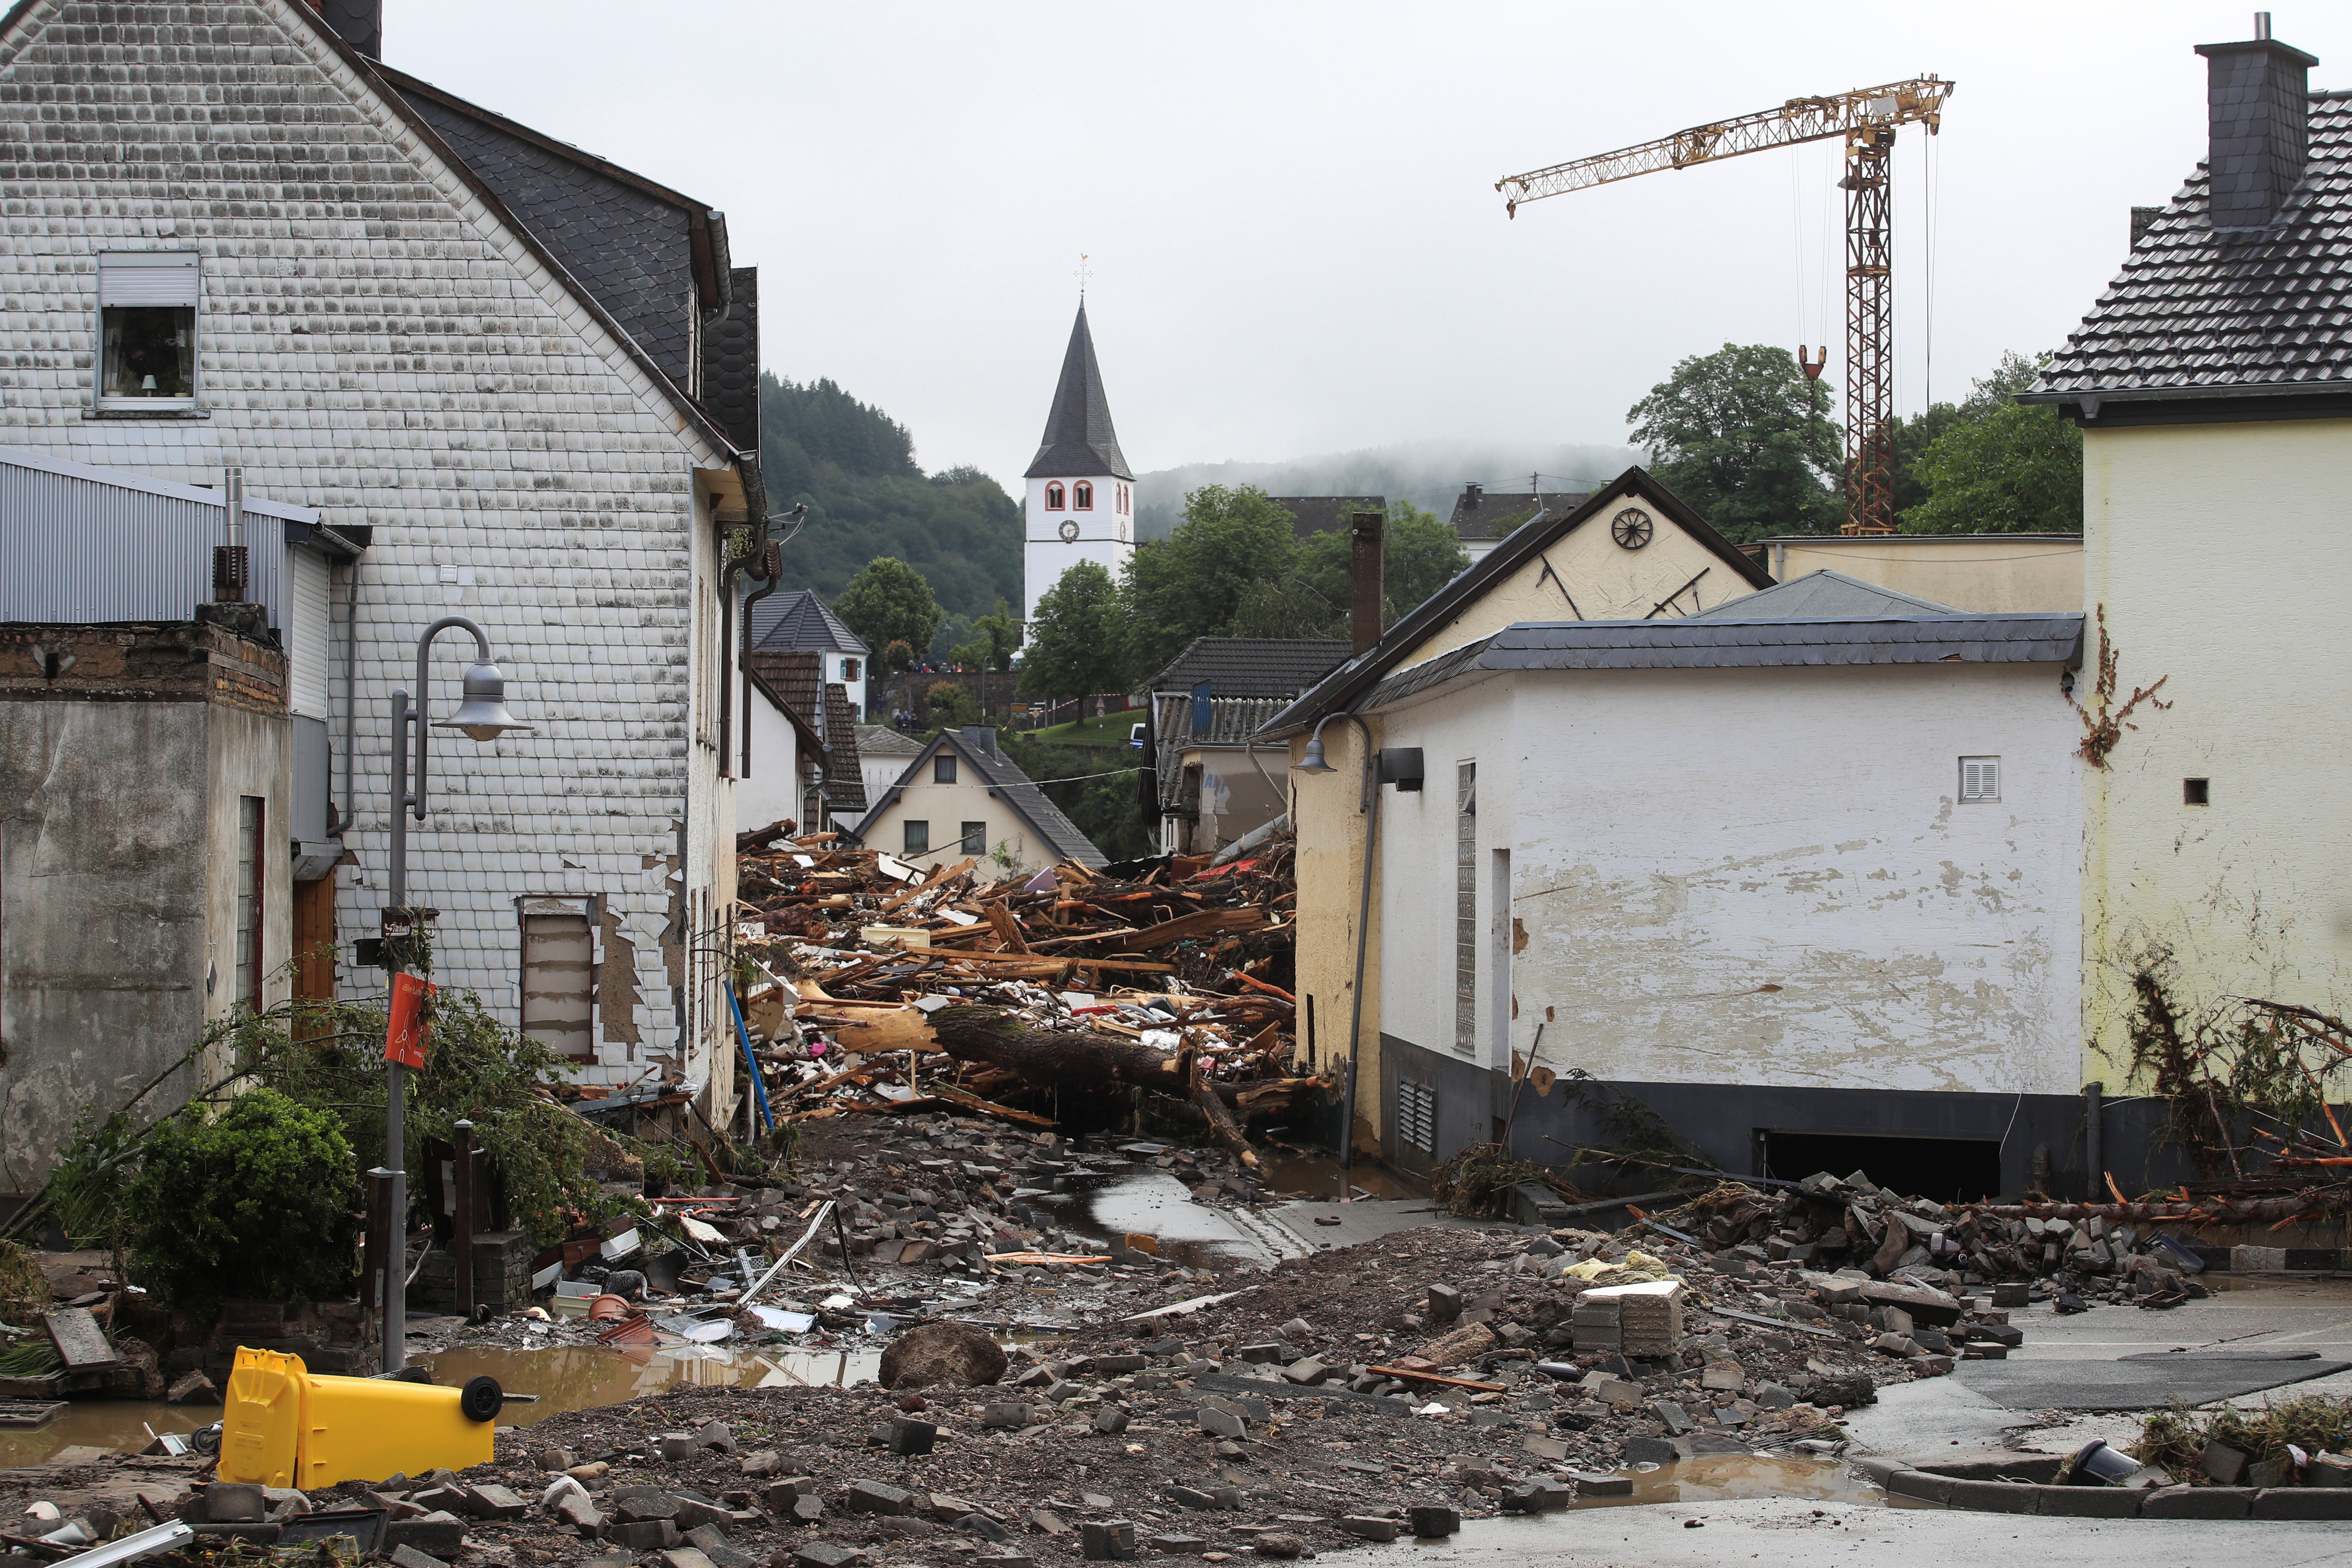 Collapsed buildings are seen on a flood-affected area following heavy rainfalls in Schuld, Germany, on July 15, 2021. REUTERS/Wolfgang Rattay